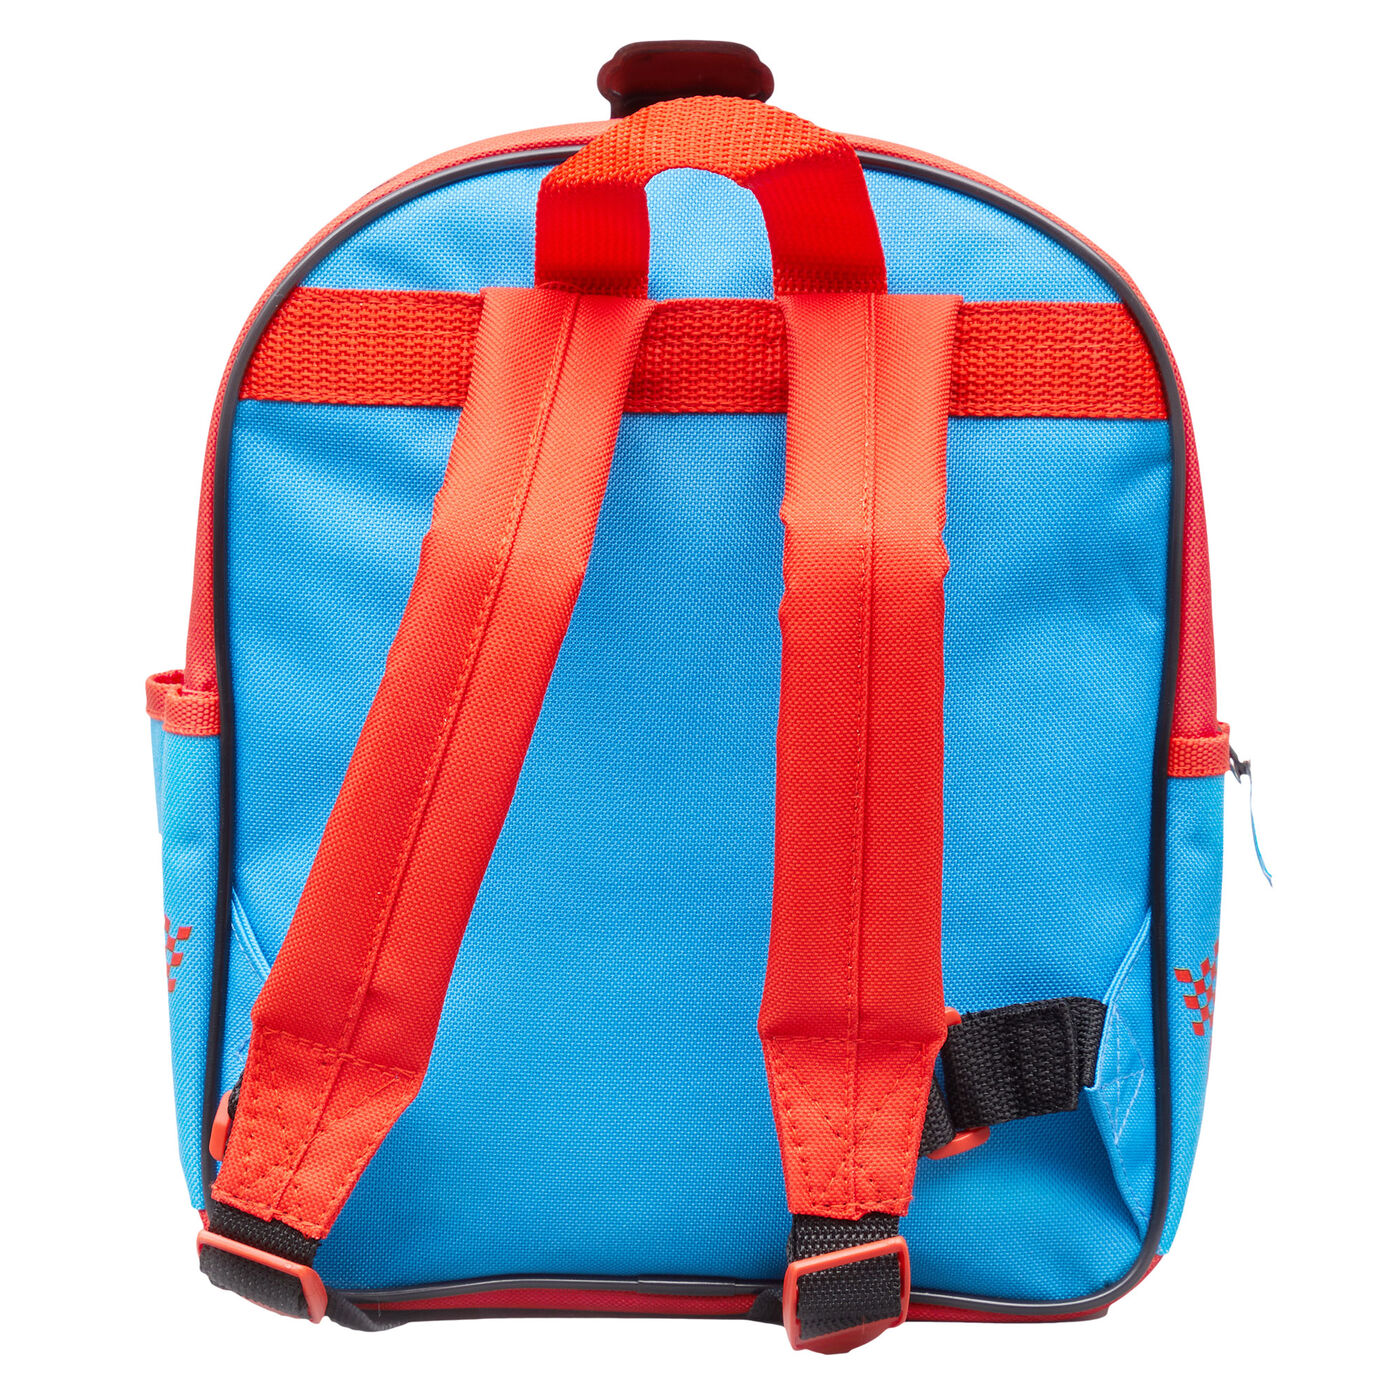 Buy Thomas & Friends Backpack for GBP 12.99 | Card Factory UK